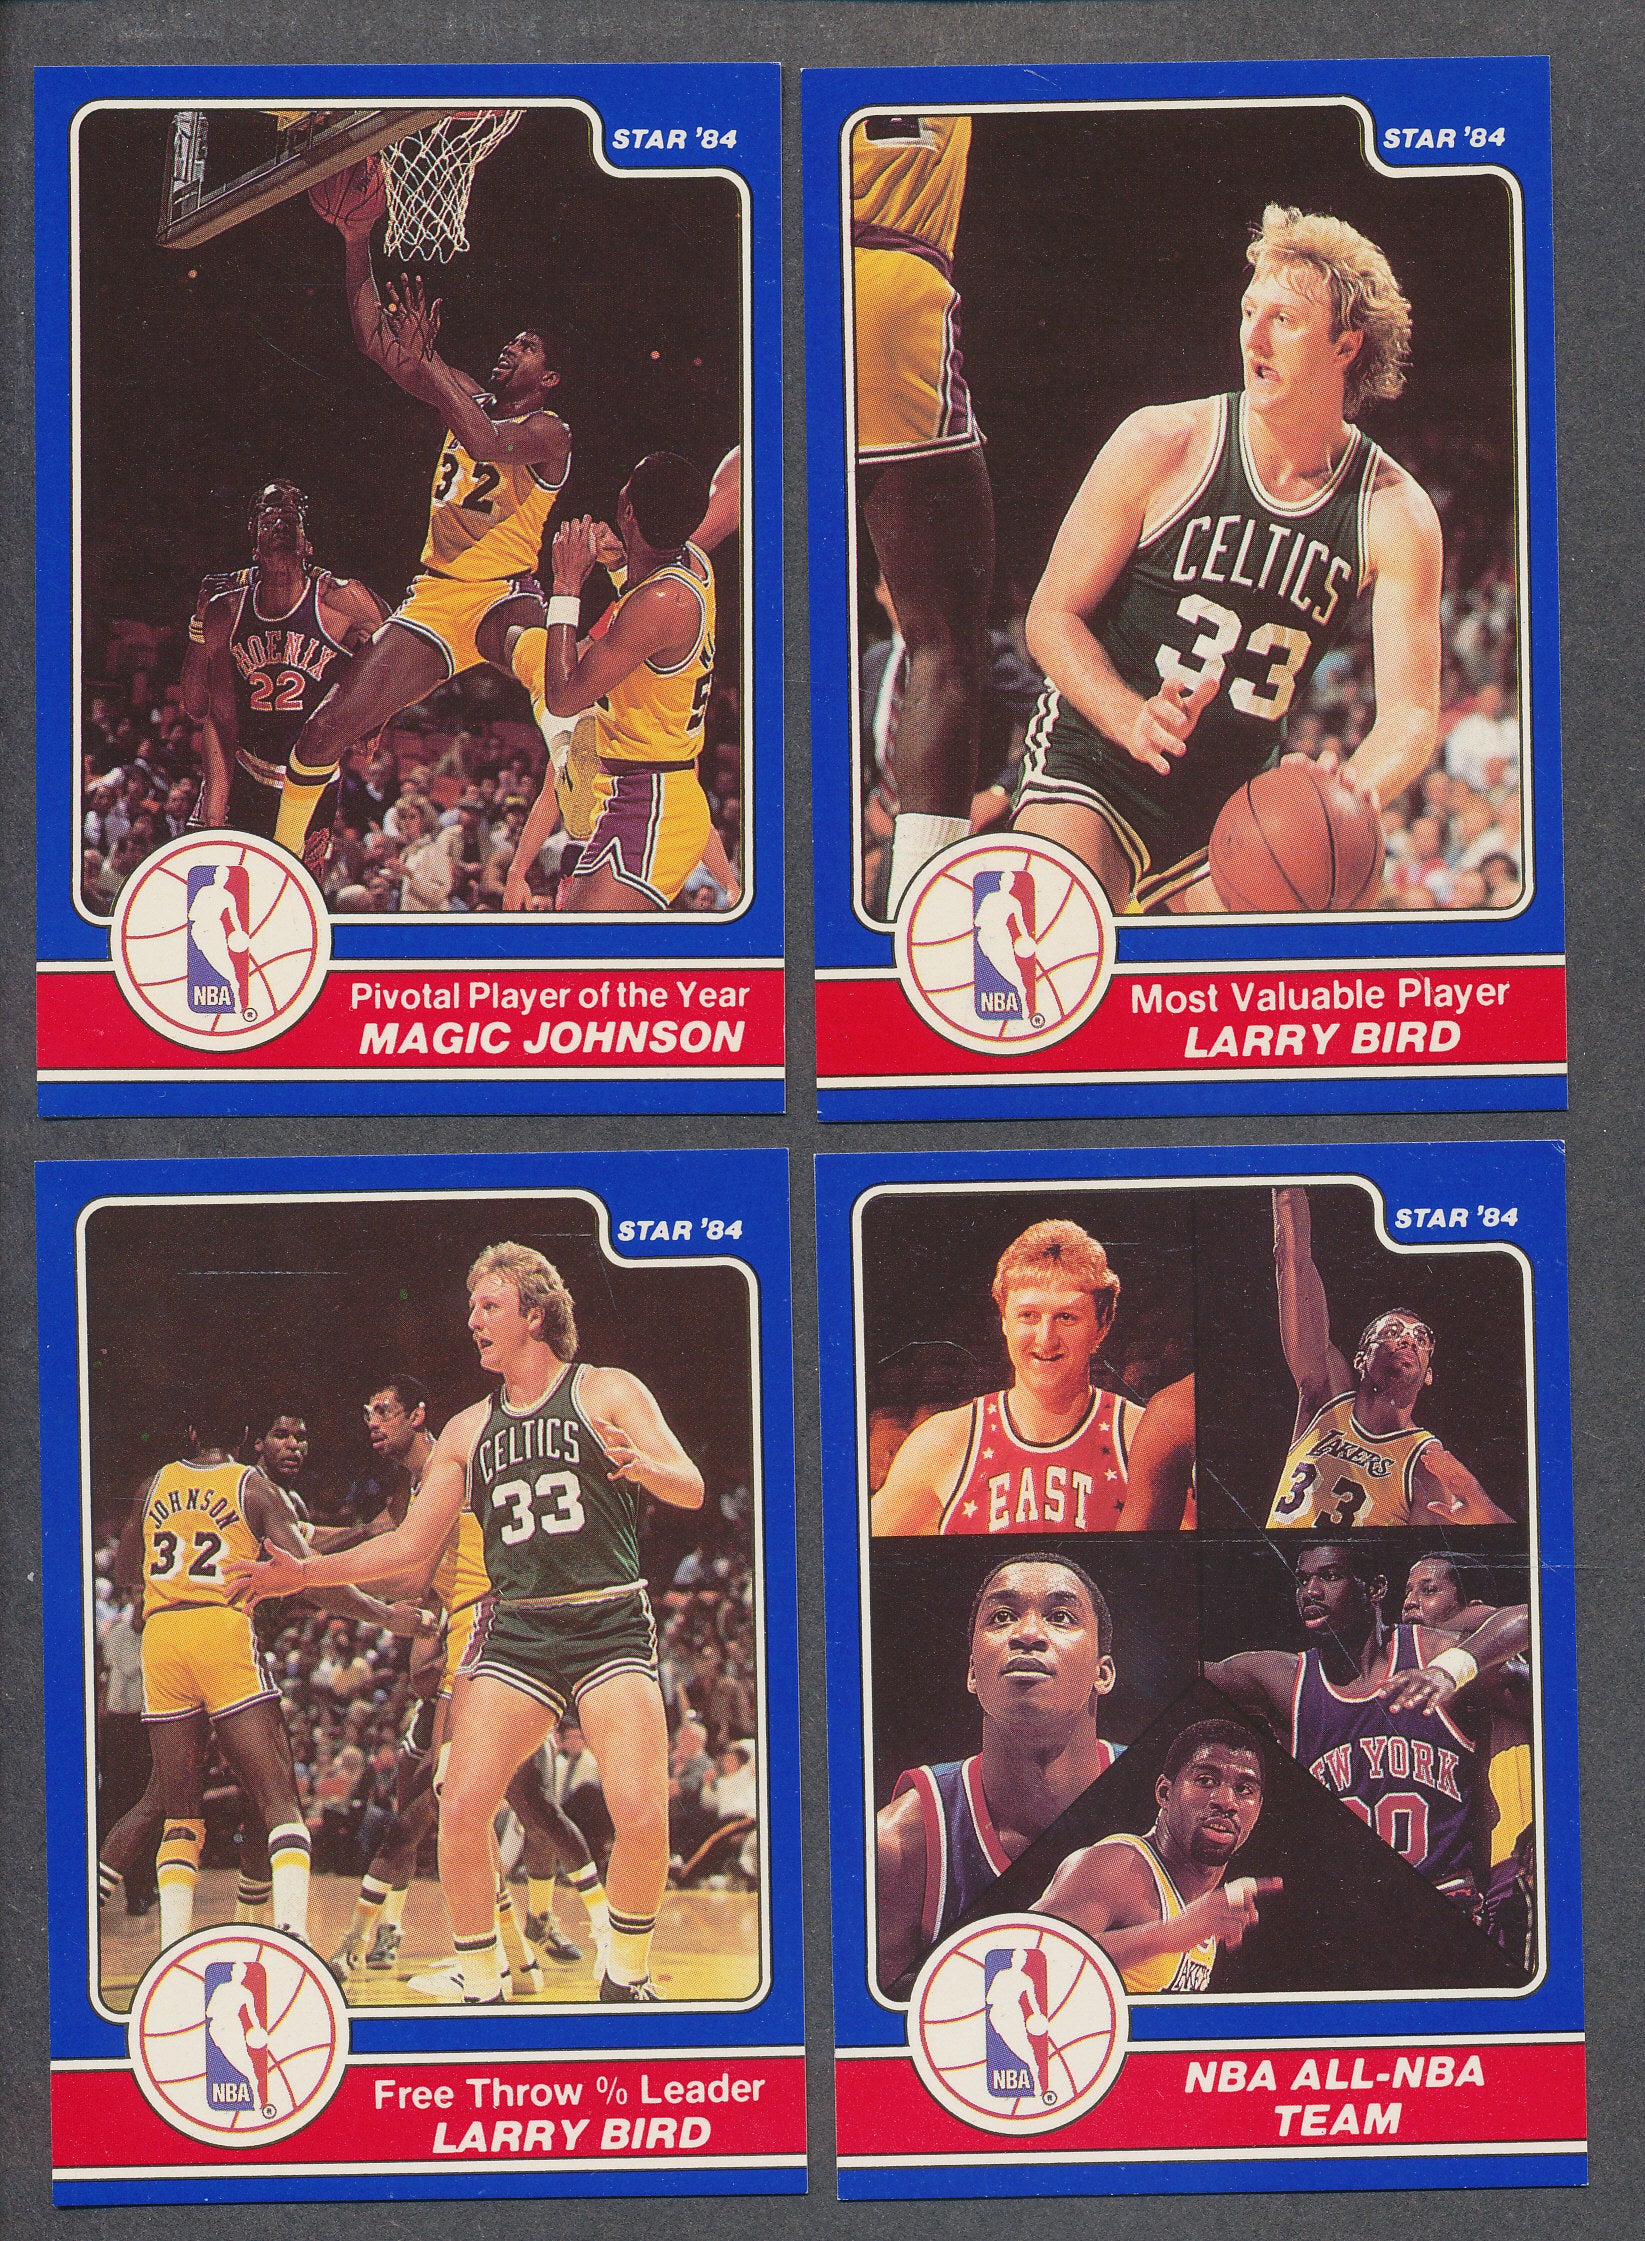 1984 Star Basketball Awards Banquet Complete Set NM NM/MT